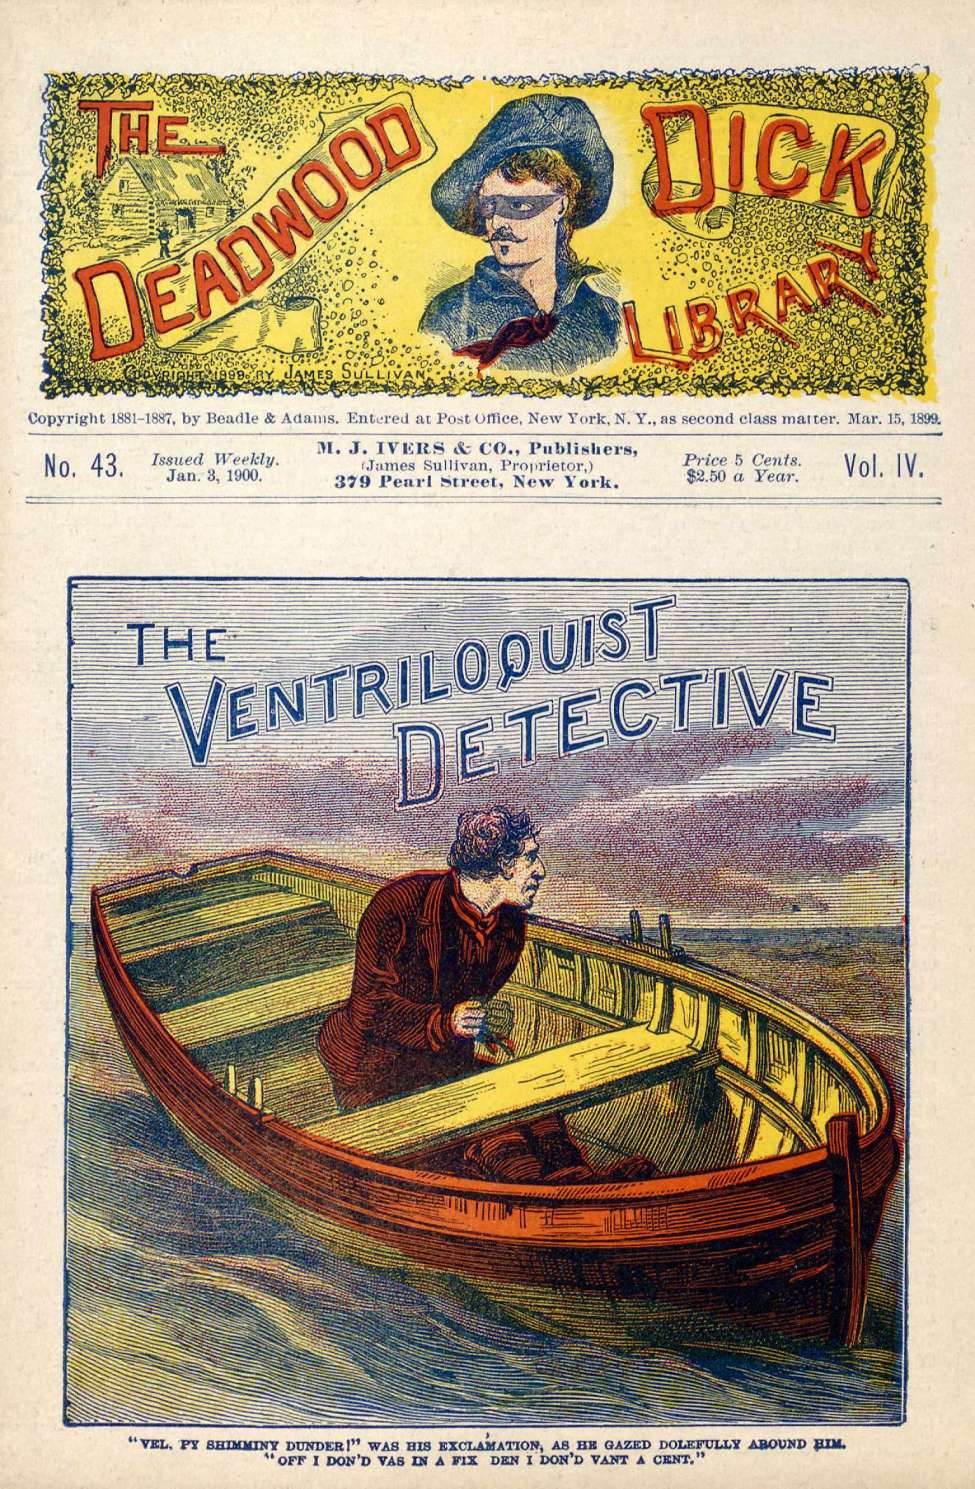 Comic Book Cover For Deadwood Dick Library v4 43 - The Ventriloquist Detective